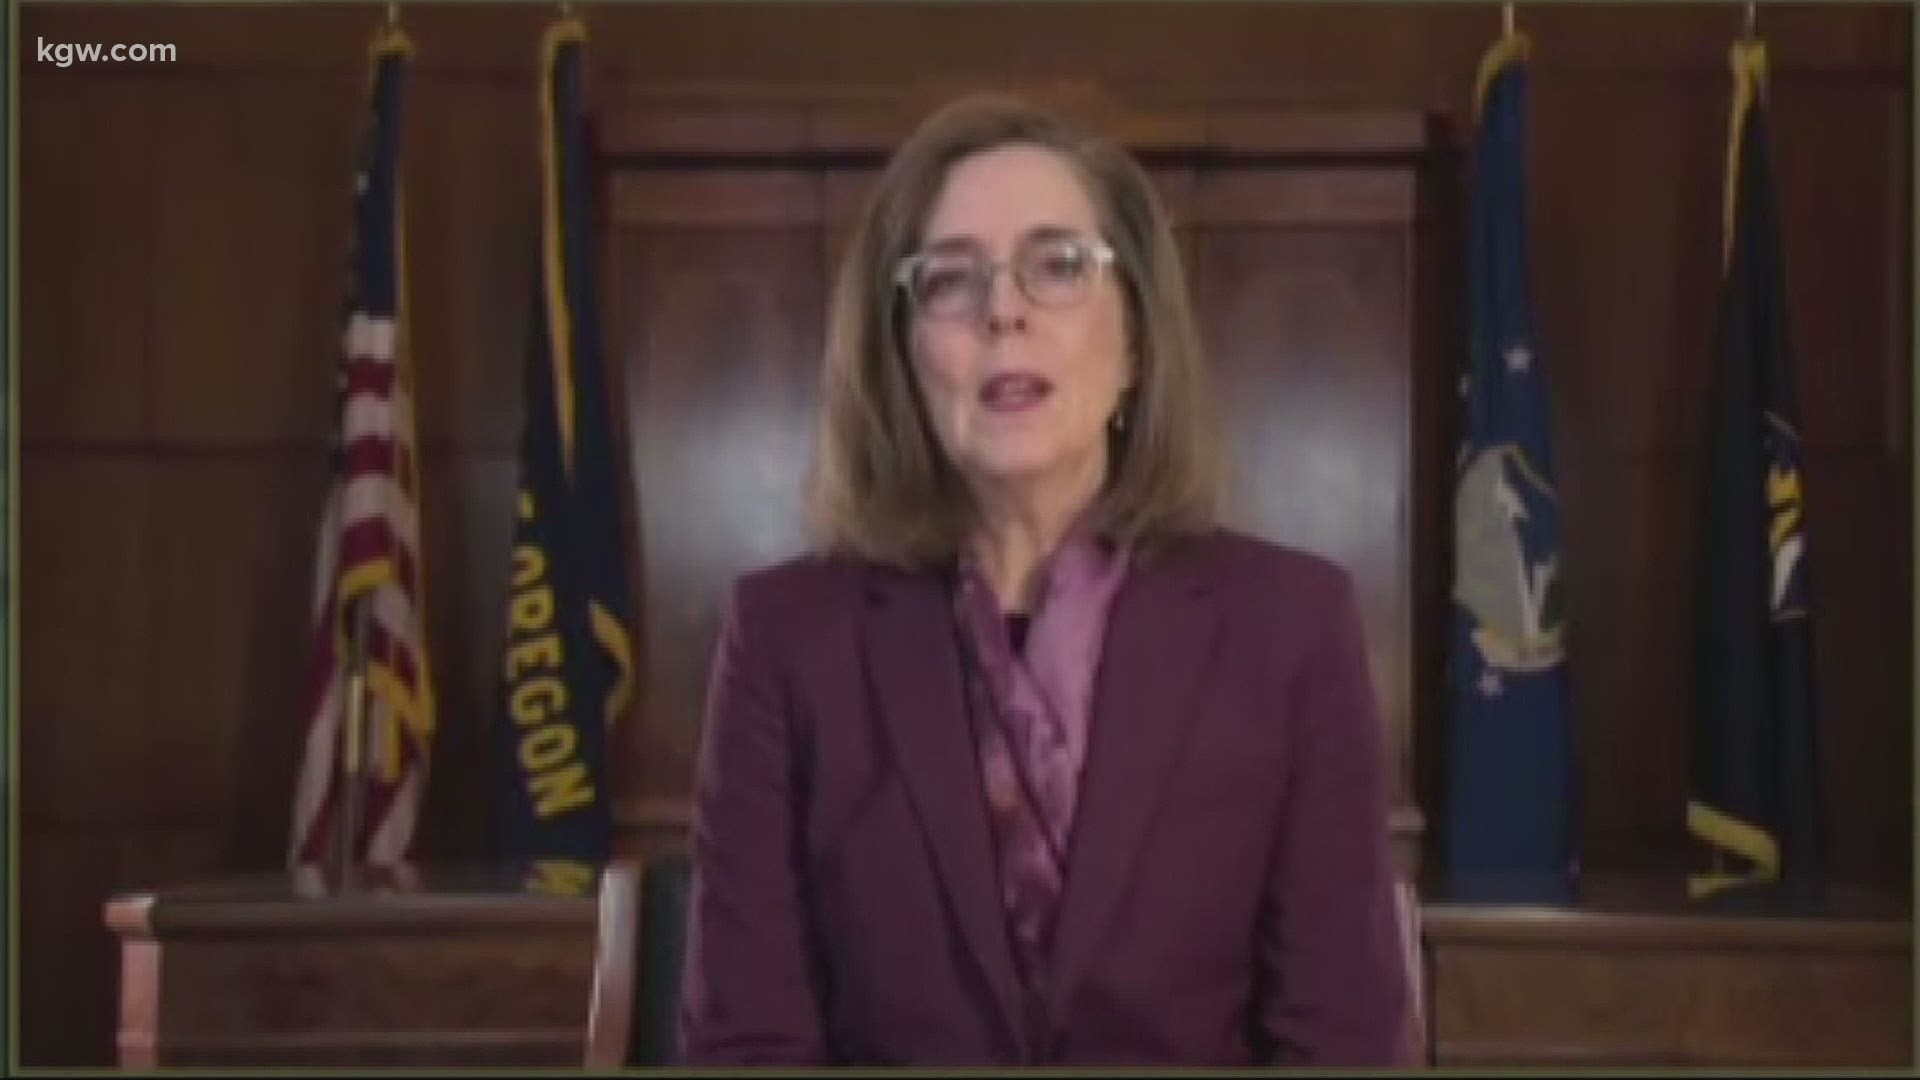 Gov. Kate Brown said a new COVID-19 framework, which puts counties into risk levels, will take effect as the two-week statewide freeze period comes to a close.